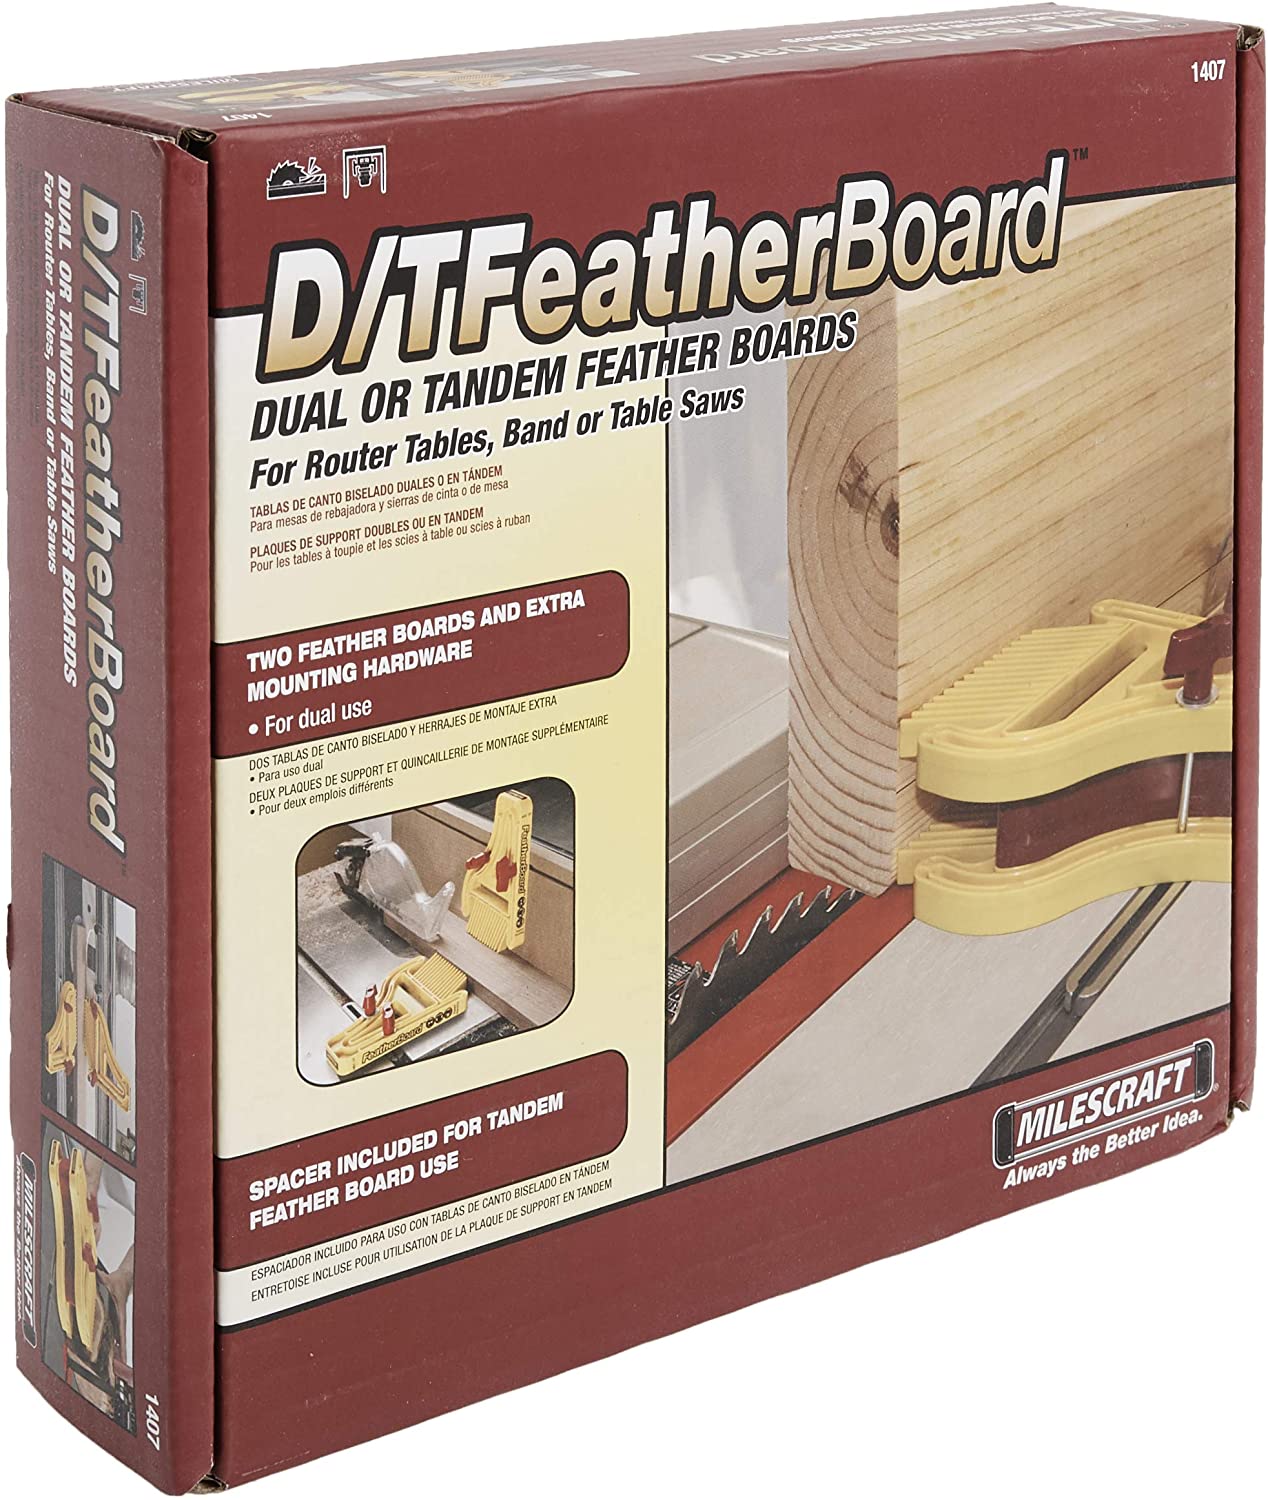 MilesCraft D/T Featherboard 1407 Power Tool Services